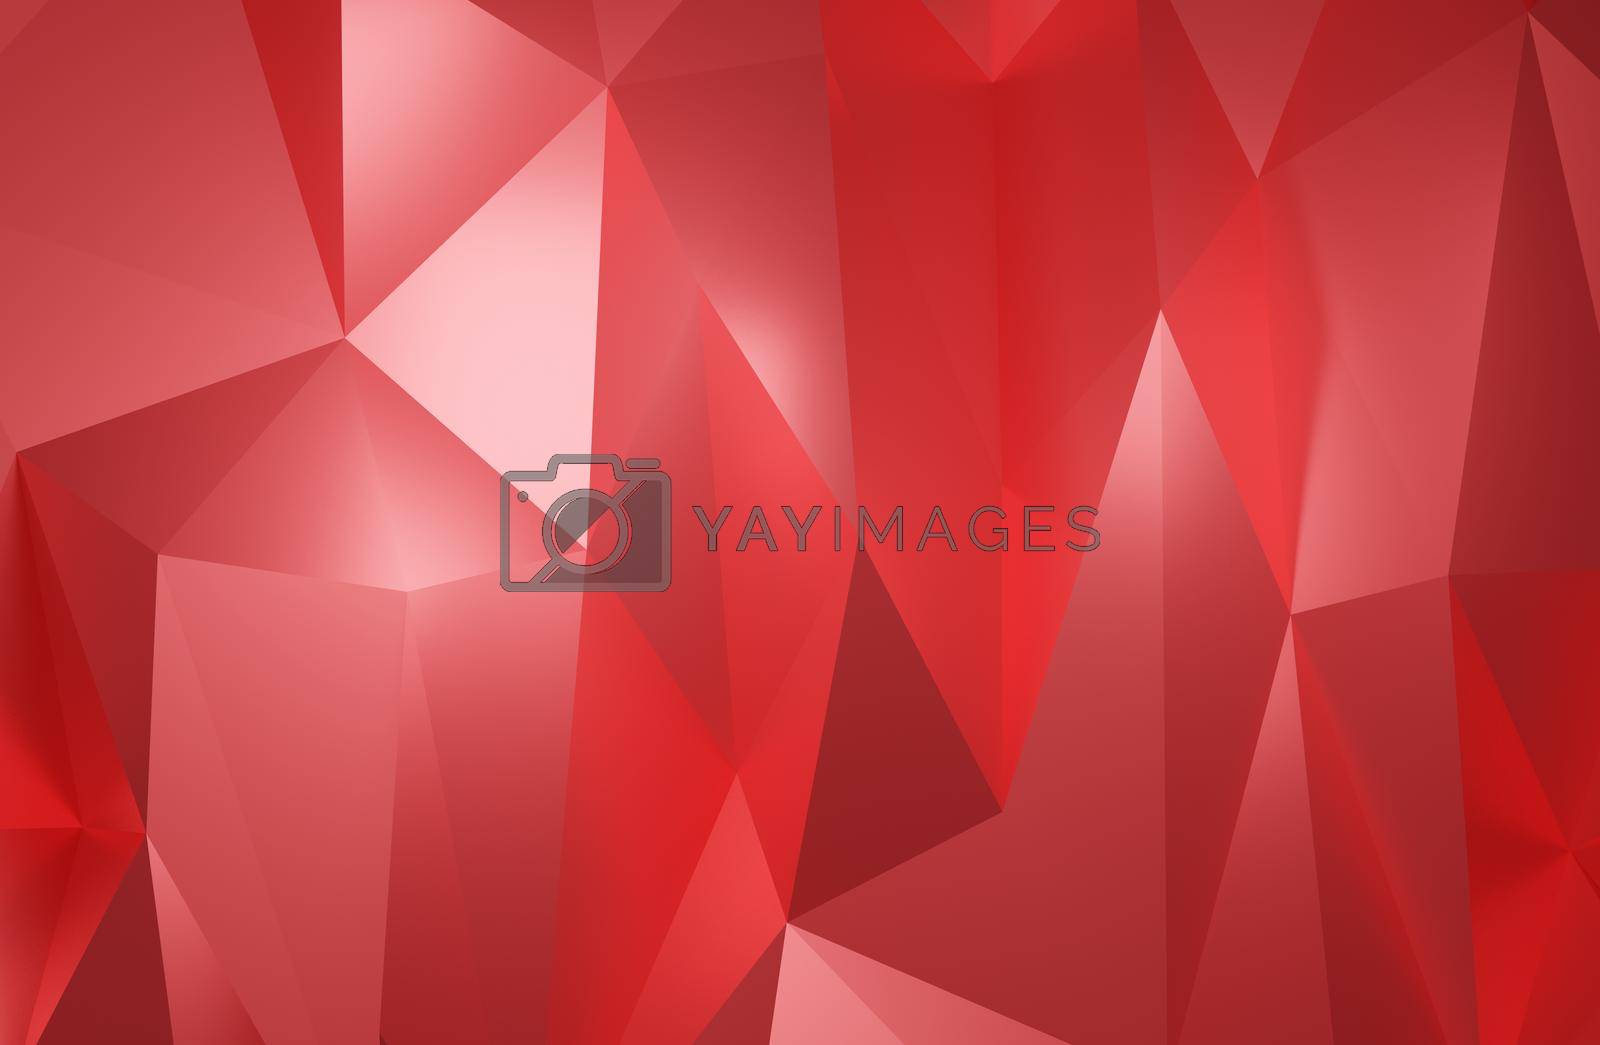 Royalty free image of Abstract geometric pattern background polygonal red triangle 3d rendering by noppha80